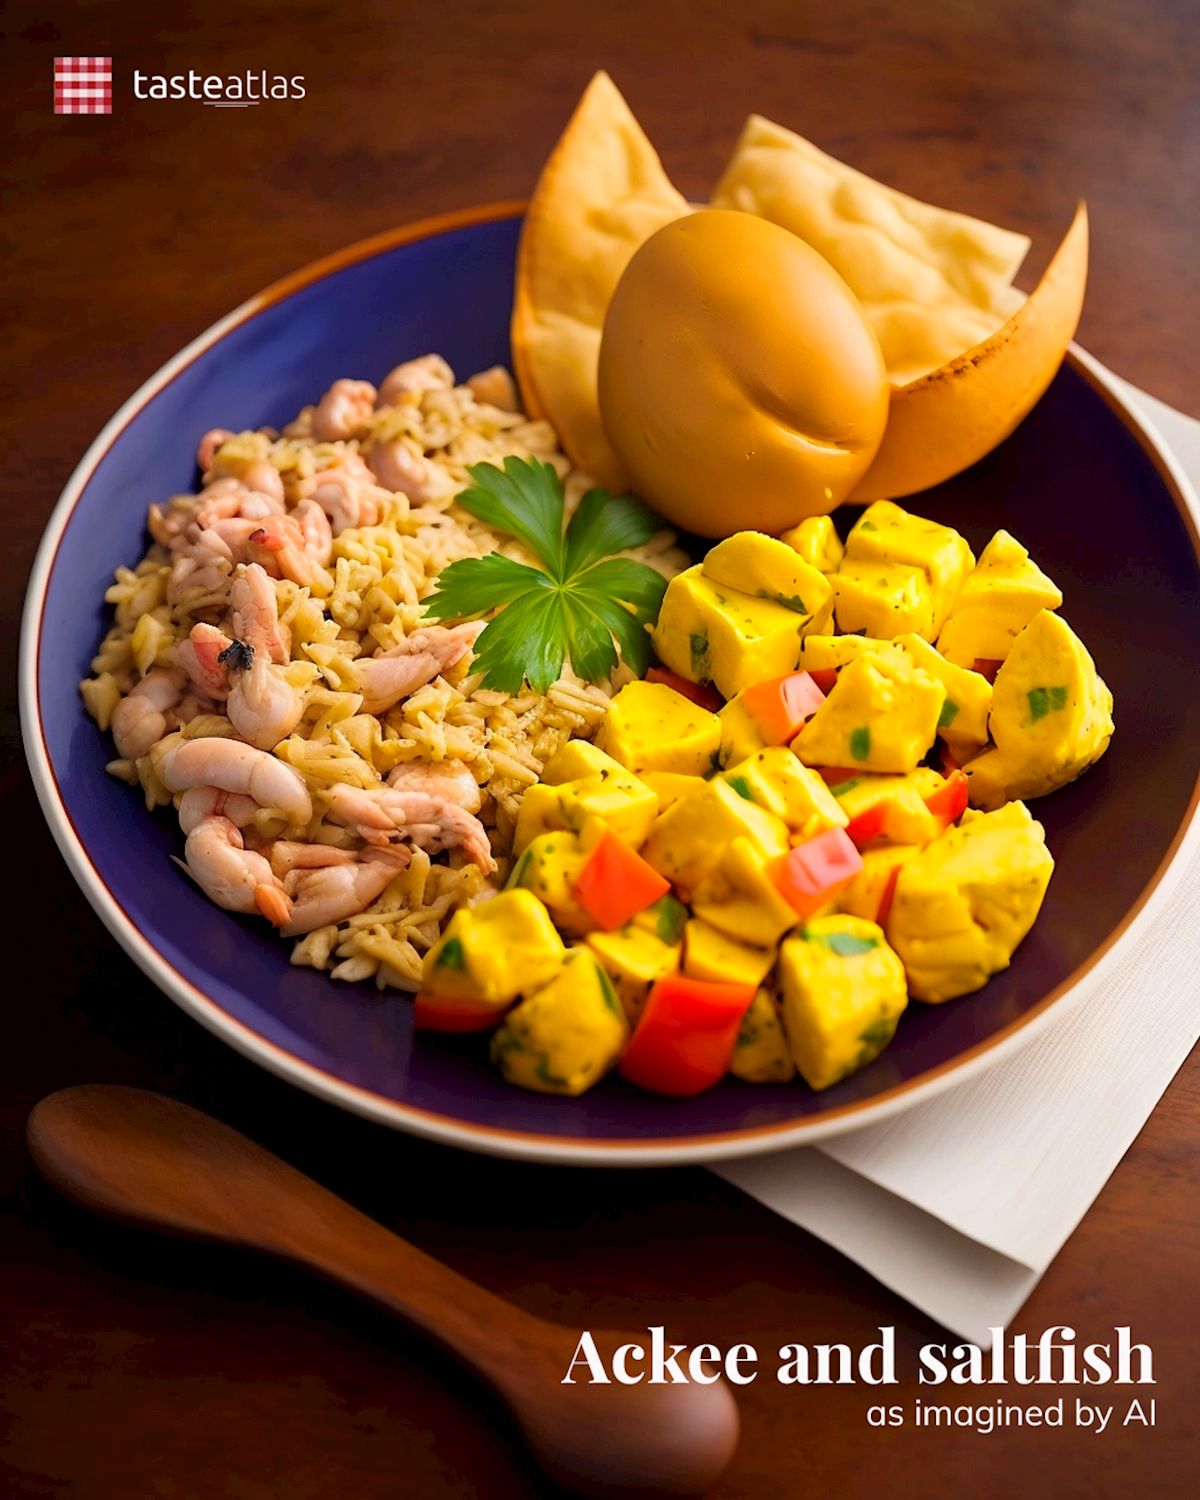 Prompt: Imagine authentic ackee and saltfish